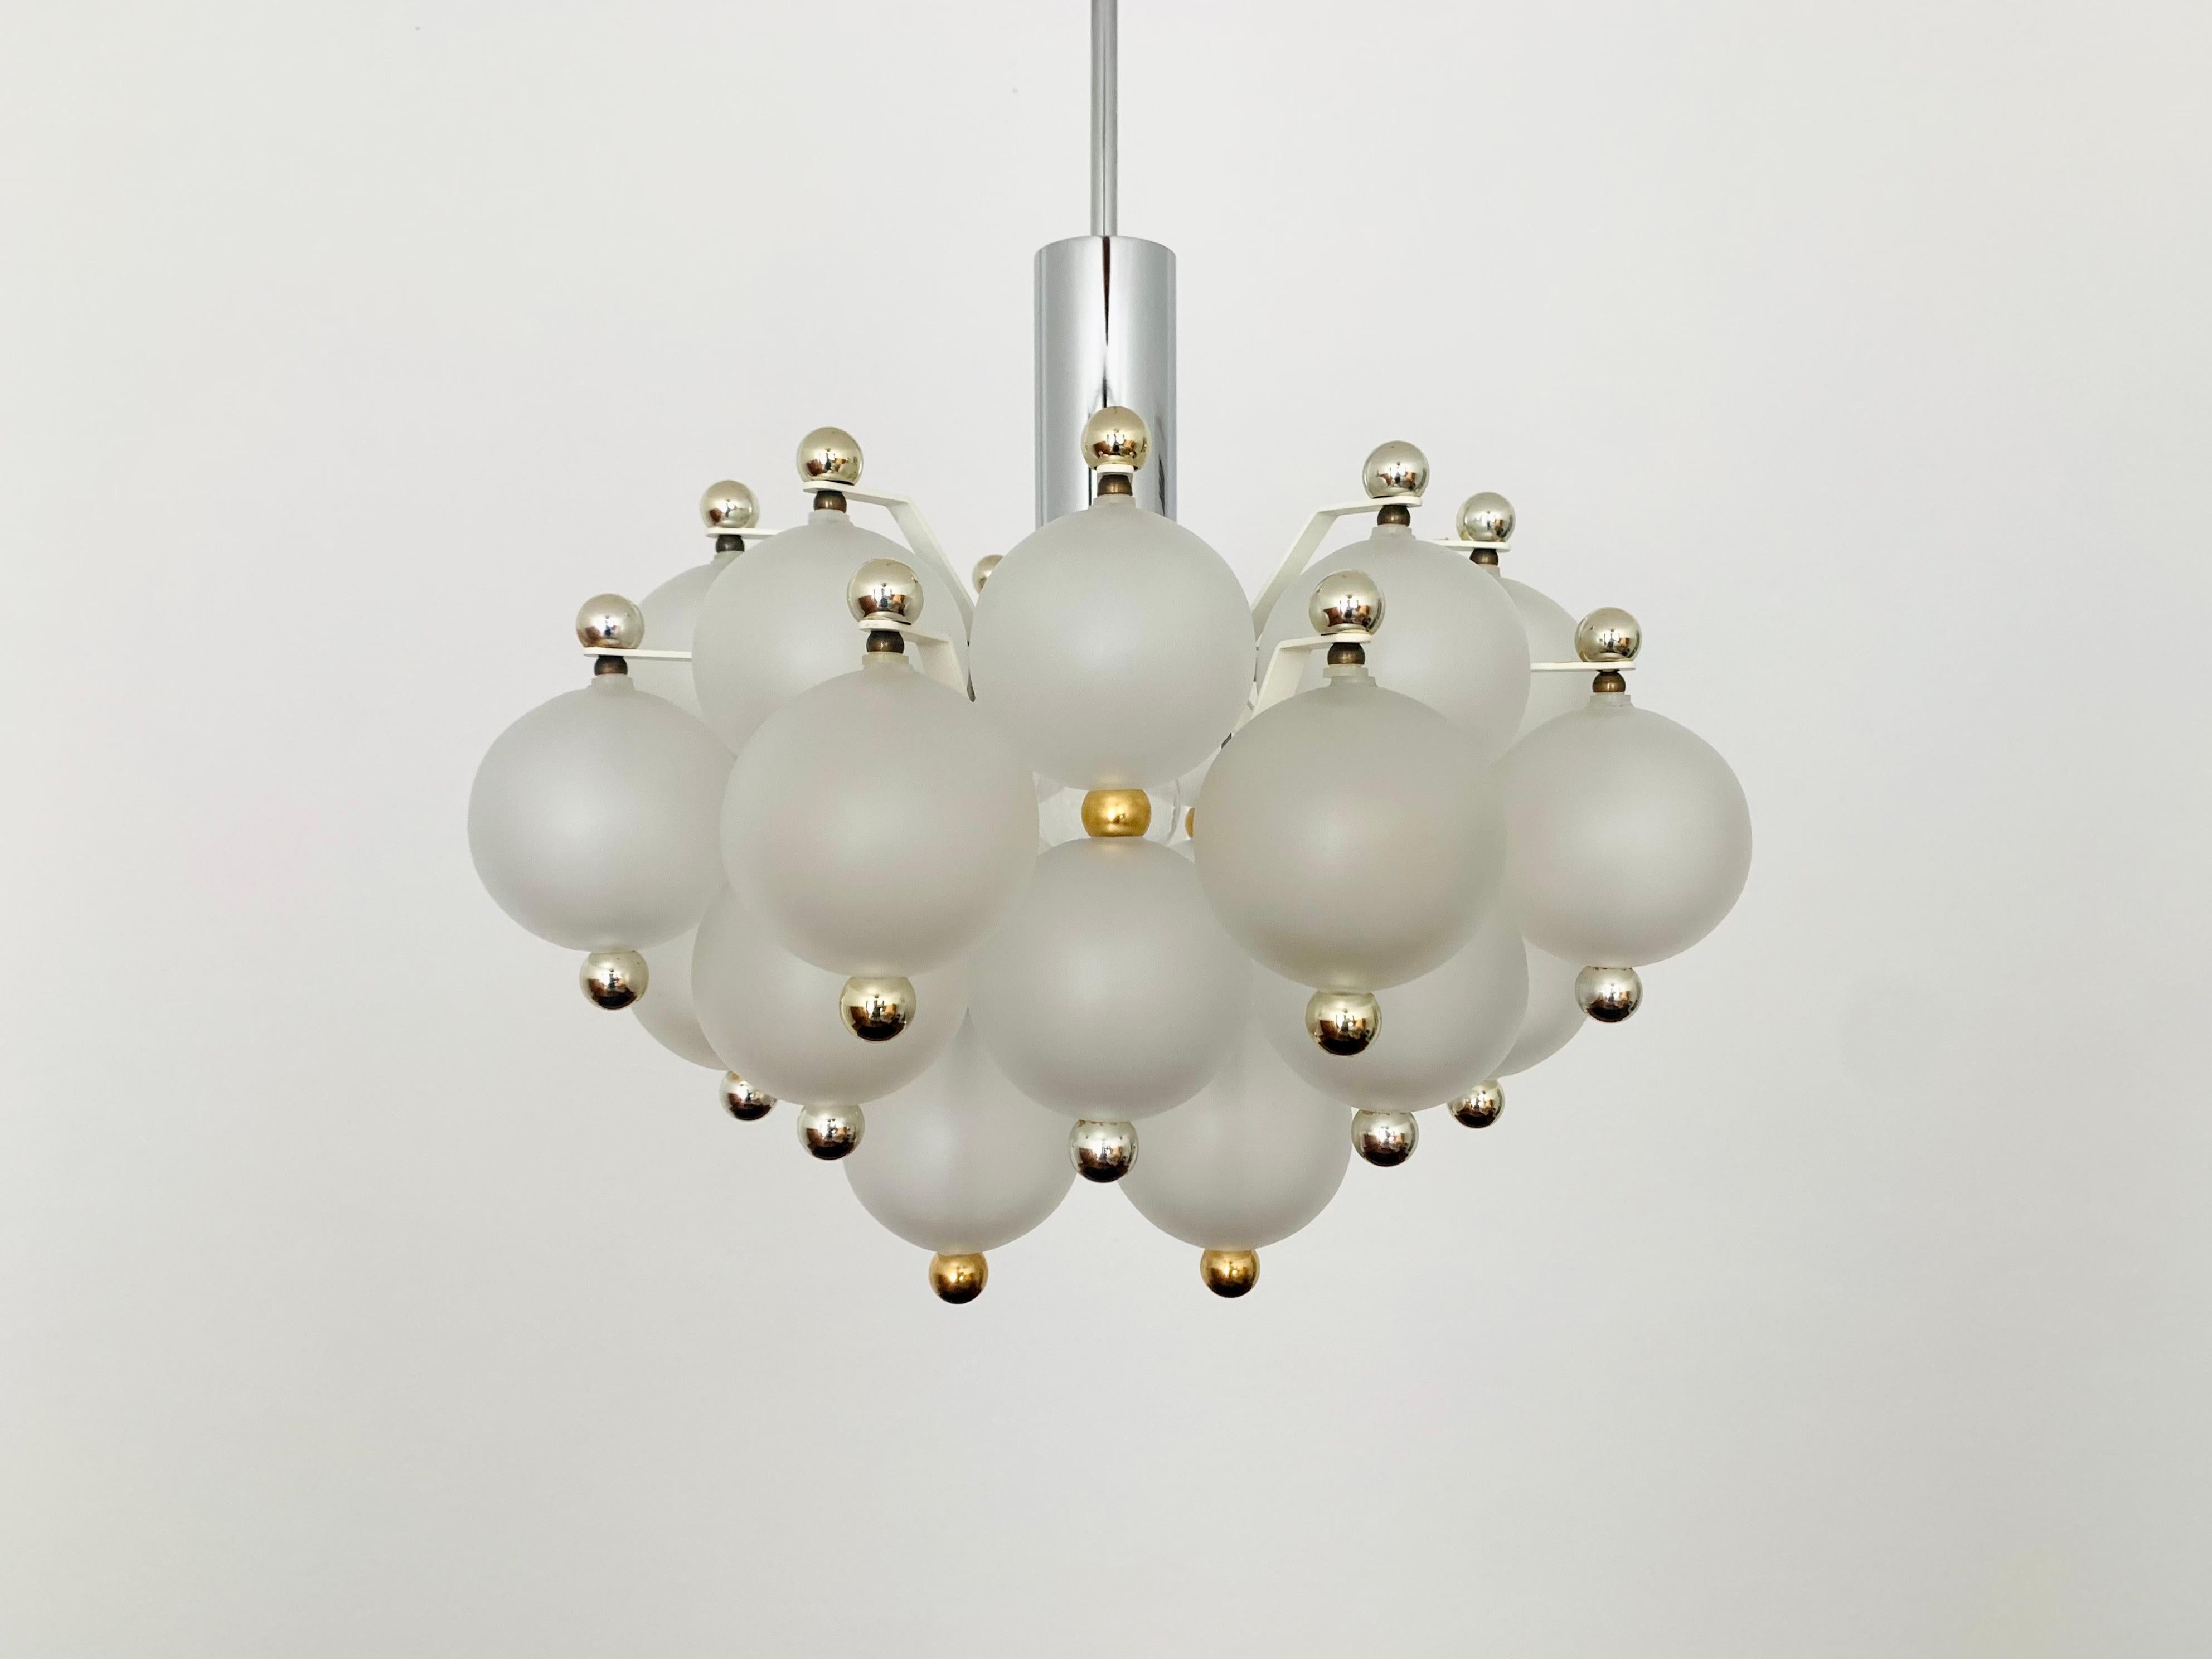 Beautiful chandelier from the 1960s.
The 31 beautifully shaped Murano glass elements with the etched surface create an impressive play of light.
Very high-quality workmanship and a real eye-catcher for every home.

Condition:

Very good vintage